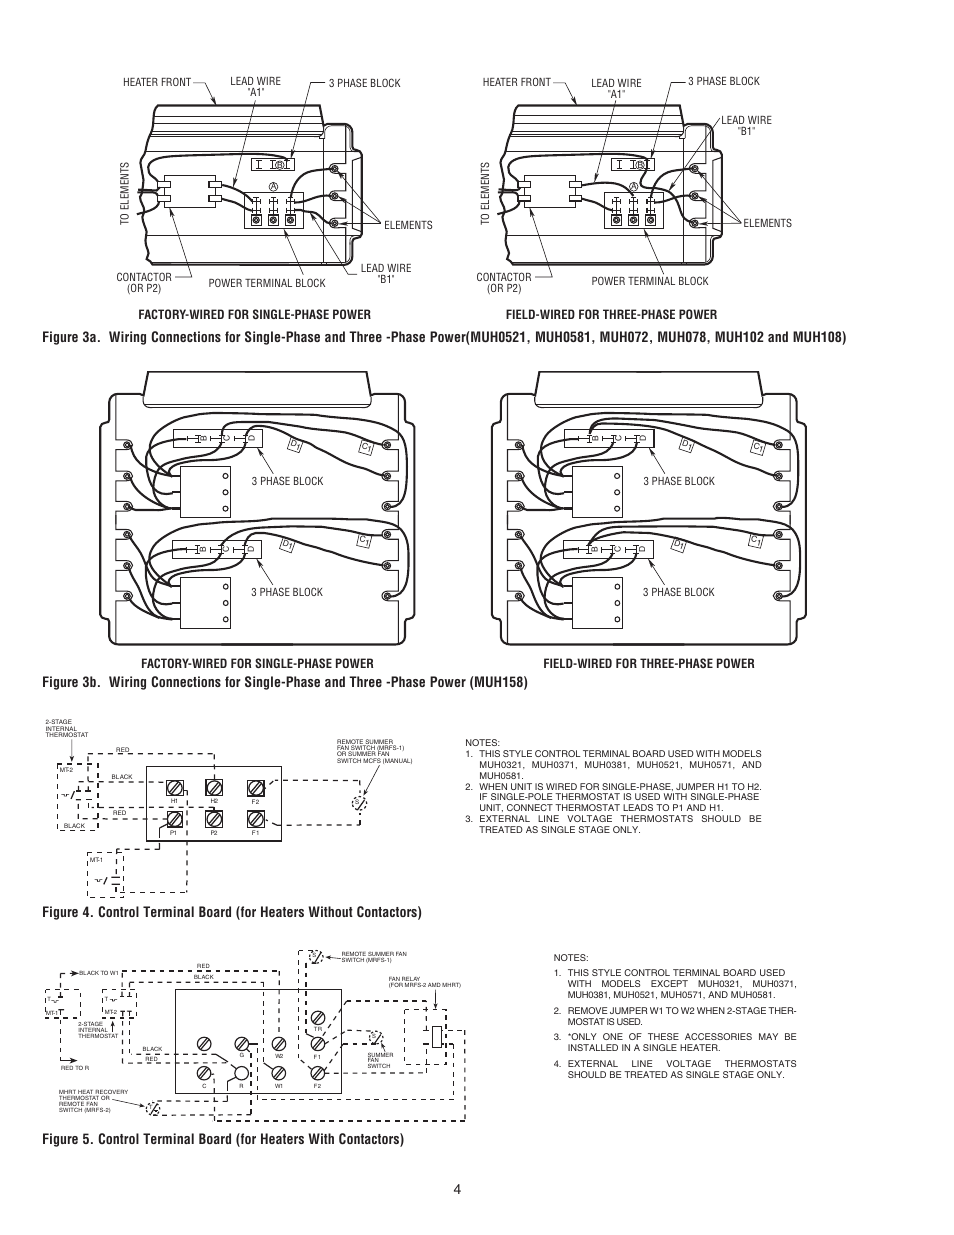 Factory-wired for single-phase power, Field-wired for three-phase power | Qmark MUH - Horizontal / Downflow Unit Heaters User Manual | Page 4 / 20